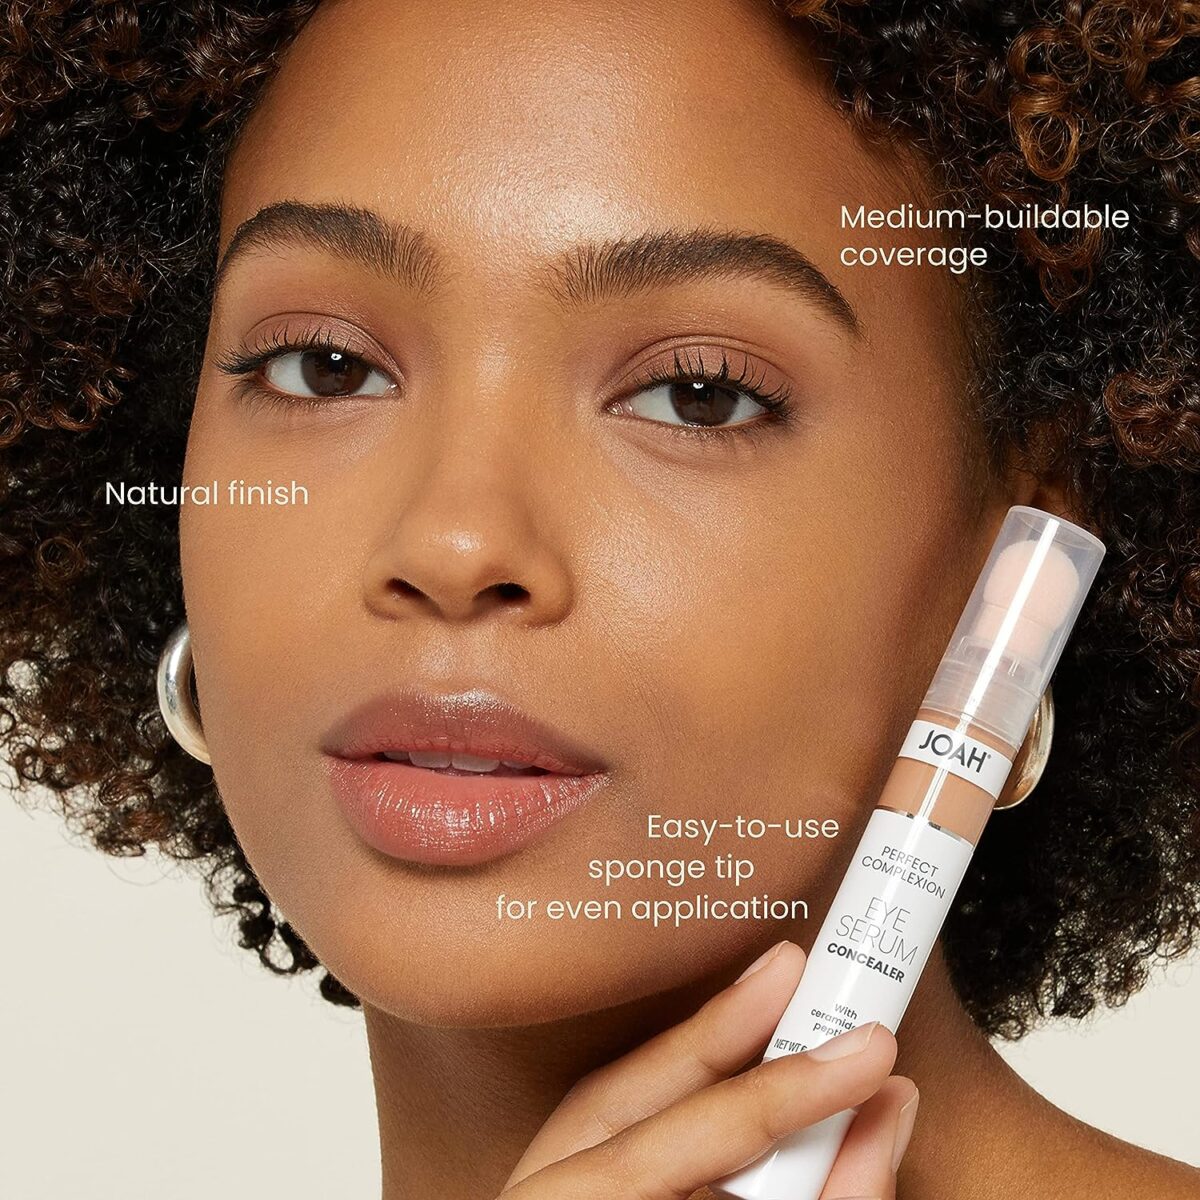 Skin Care, Cosmetics , Personal Care, Beauty, Complexion Under Eye Concealer